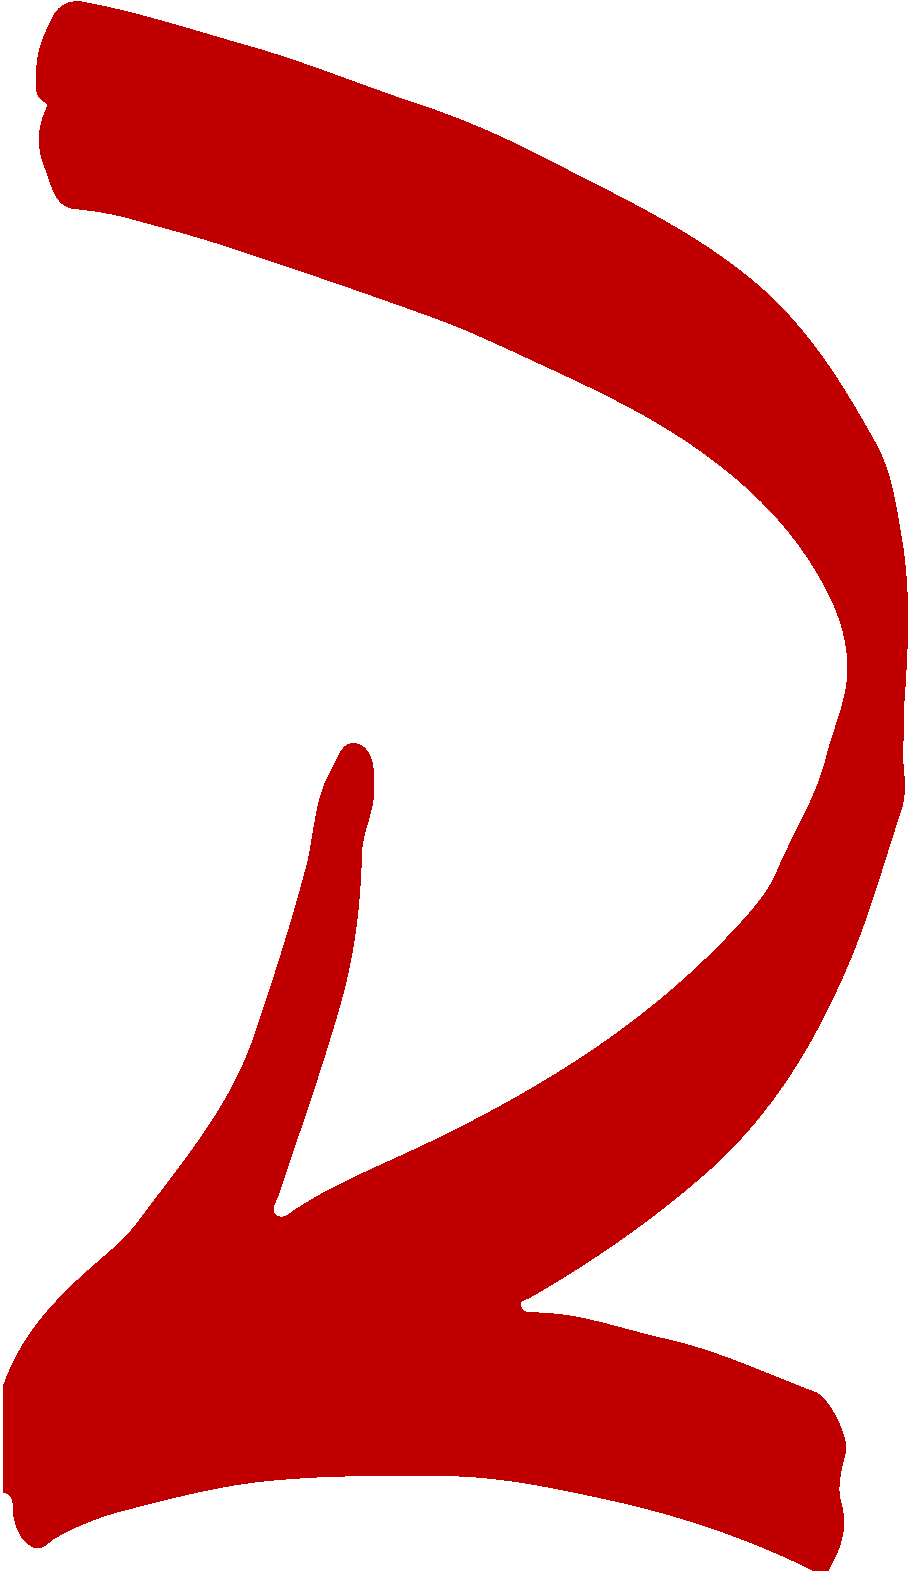 Curved Red Arrow PNG Image